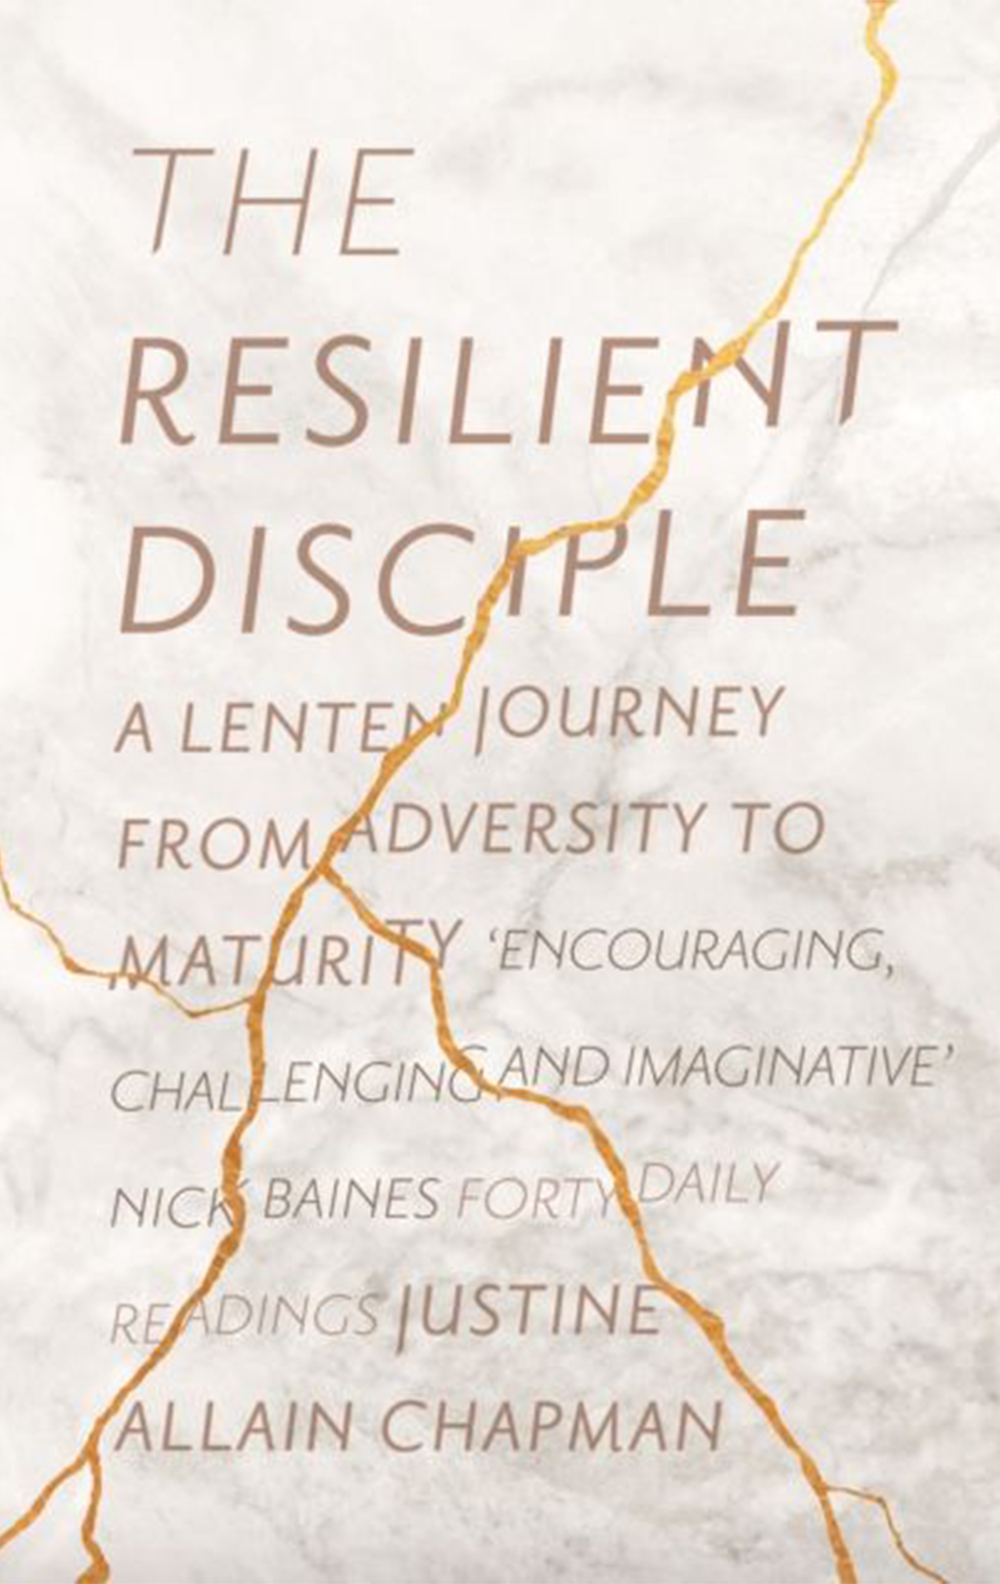 The Resilient Disciple